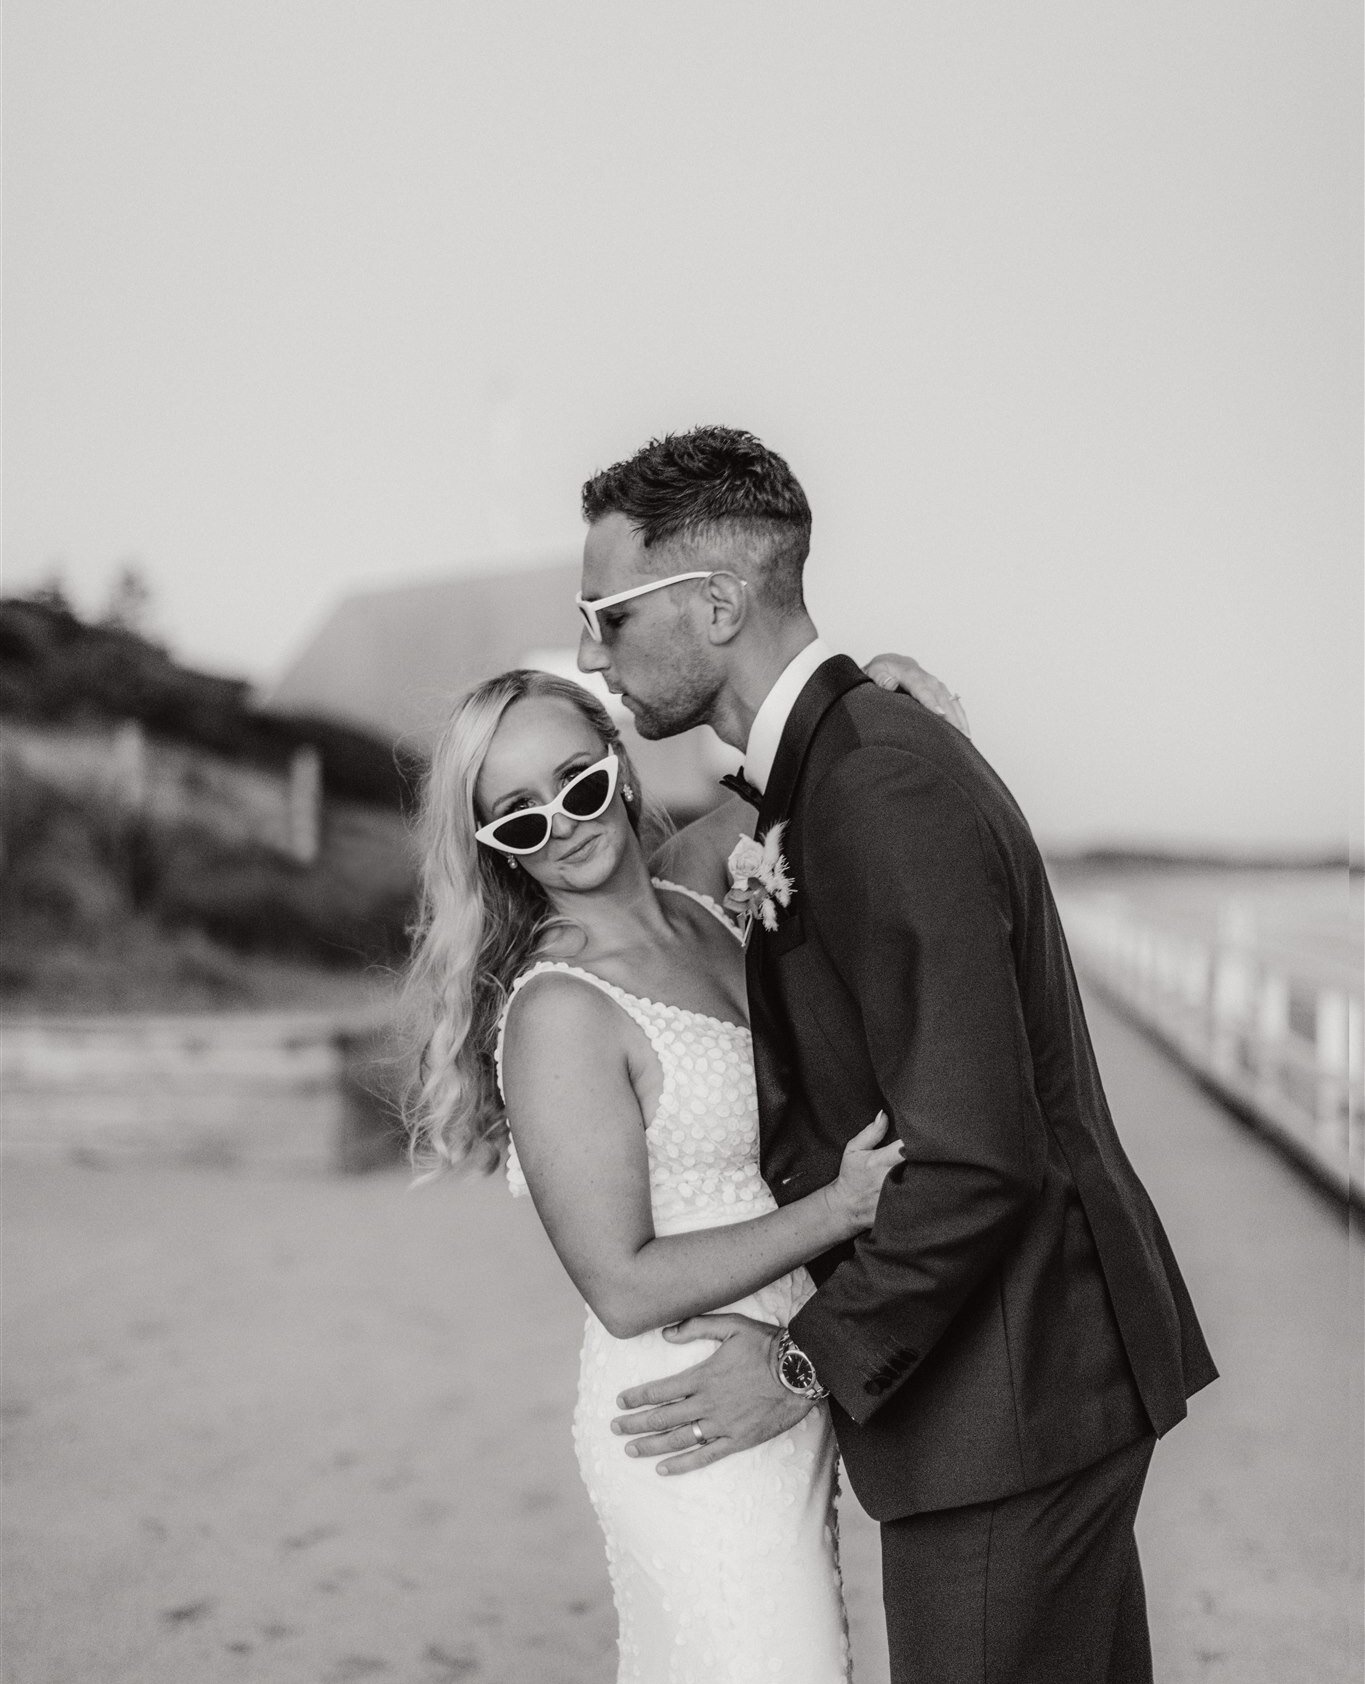 Always attracting the trendiest couples - how cool do C &amp; S look in their shades! 🤍🔥⁠
⁠
Photographer: @stephwallis_photography